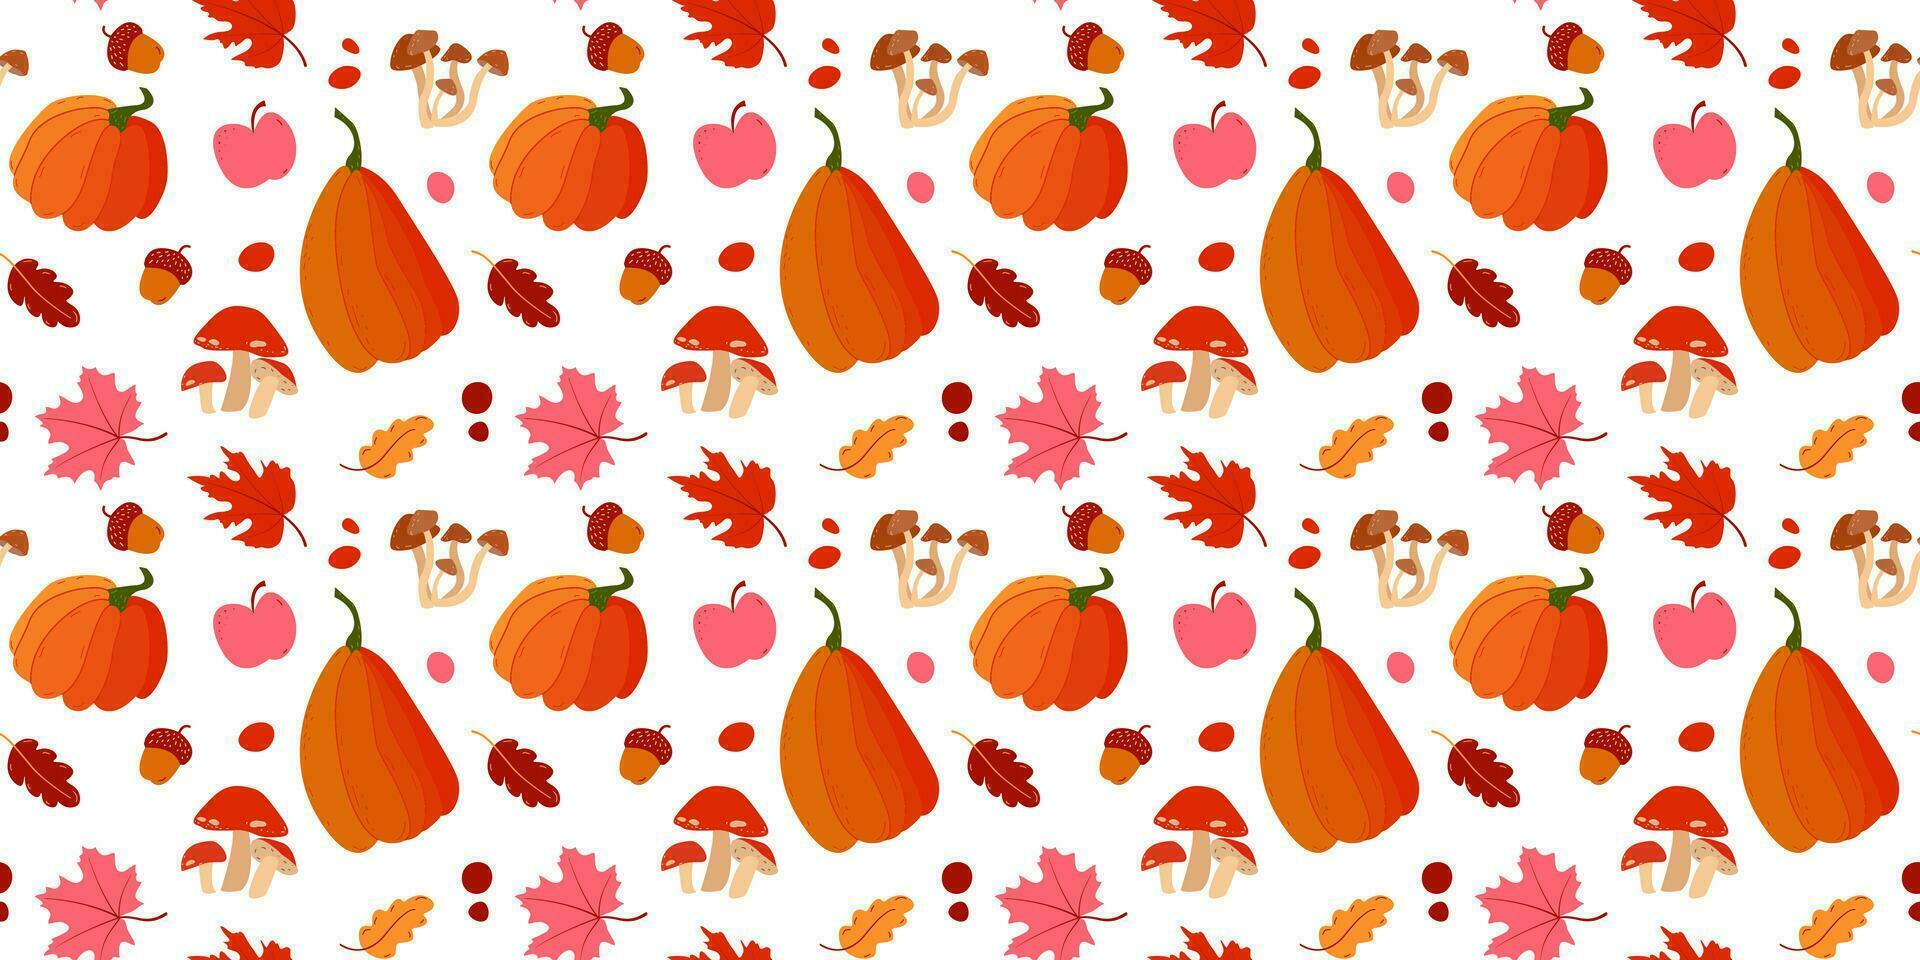 Colorful cozy autumn seamless pattern. Pumpkins and leaves pattern vector